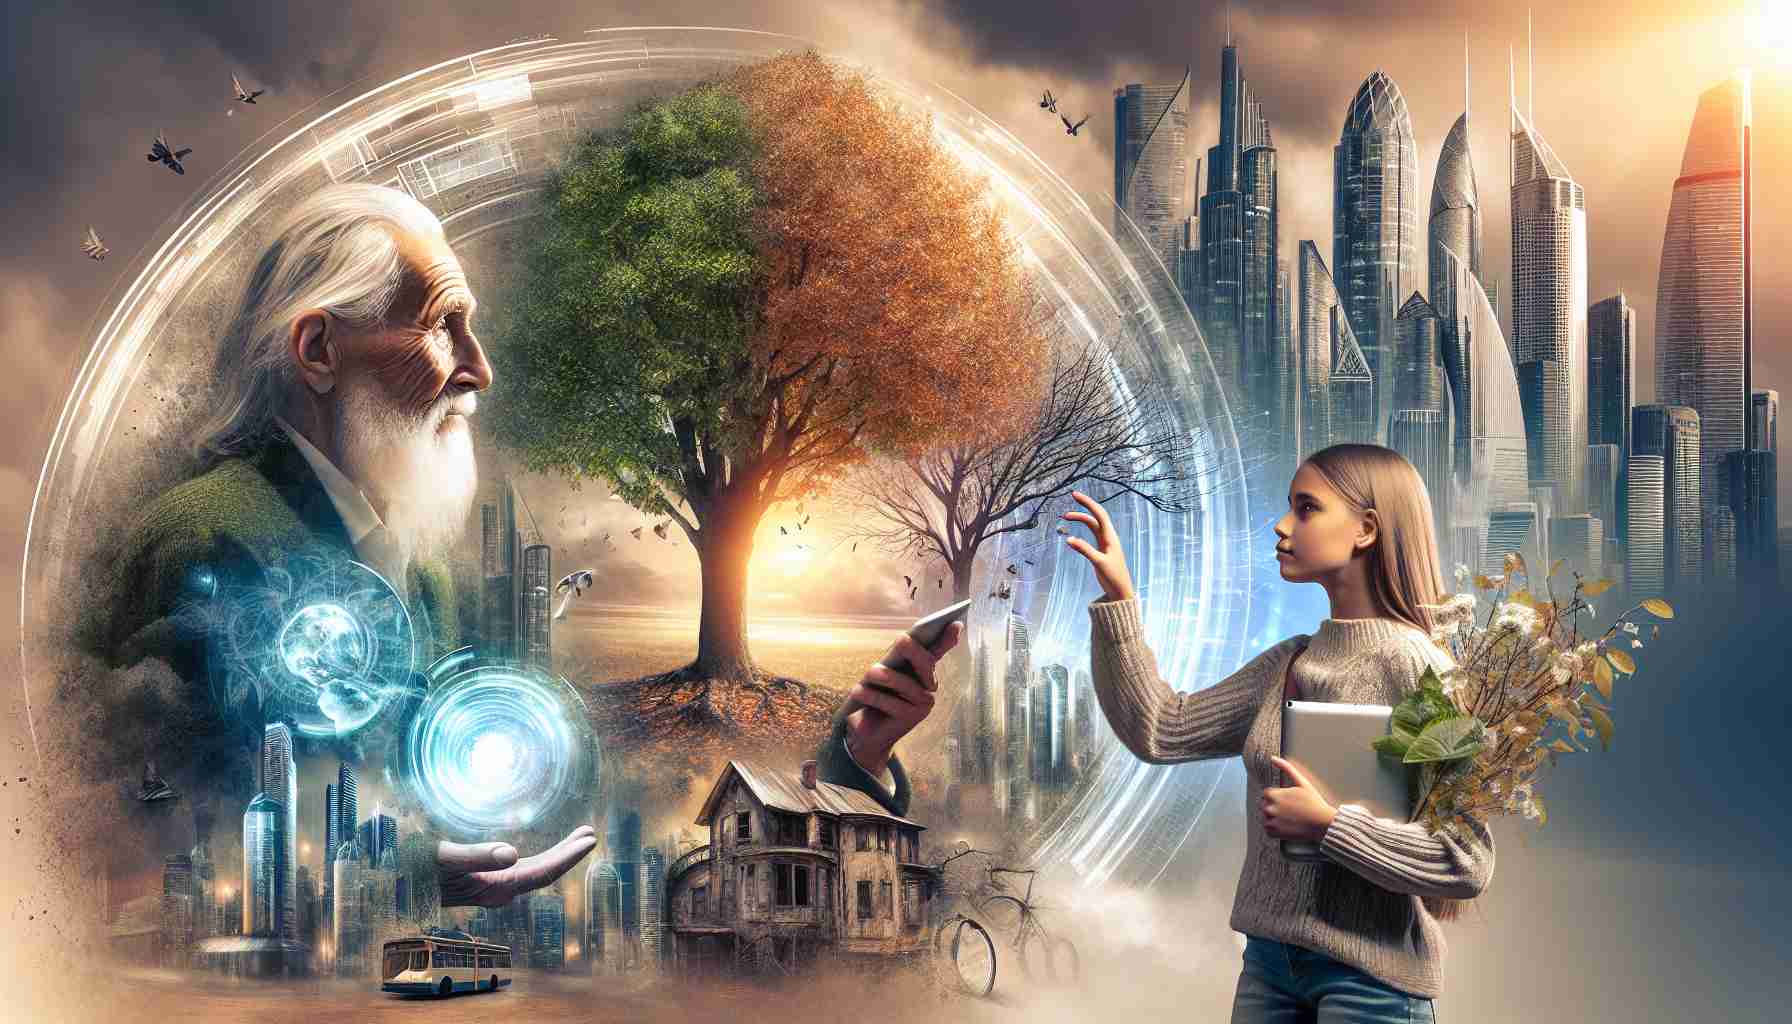 A high-definition photo portraying the concept of 'Respecting the Past, Embracing the Future'. The composition features an elder, symbolizing the past, appreciating a tree while passing on wisdom to a young girl. The girl, symbolizing the future, listens attentively, holds modern technologies in her hand, and looks towards a distant skyline filled with futuristic buildings. In the faded background also includes architectural transitions from old to new, symbolizing the progress of time.